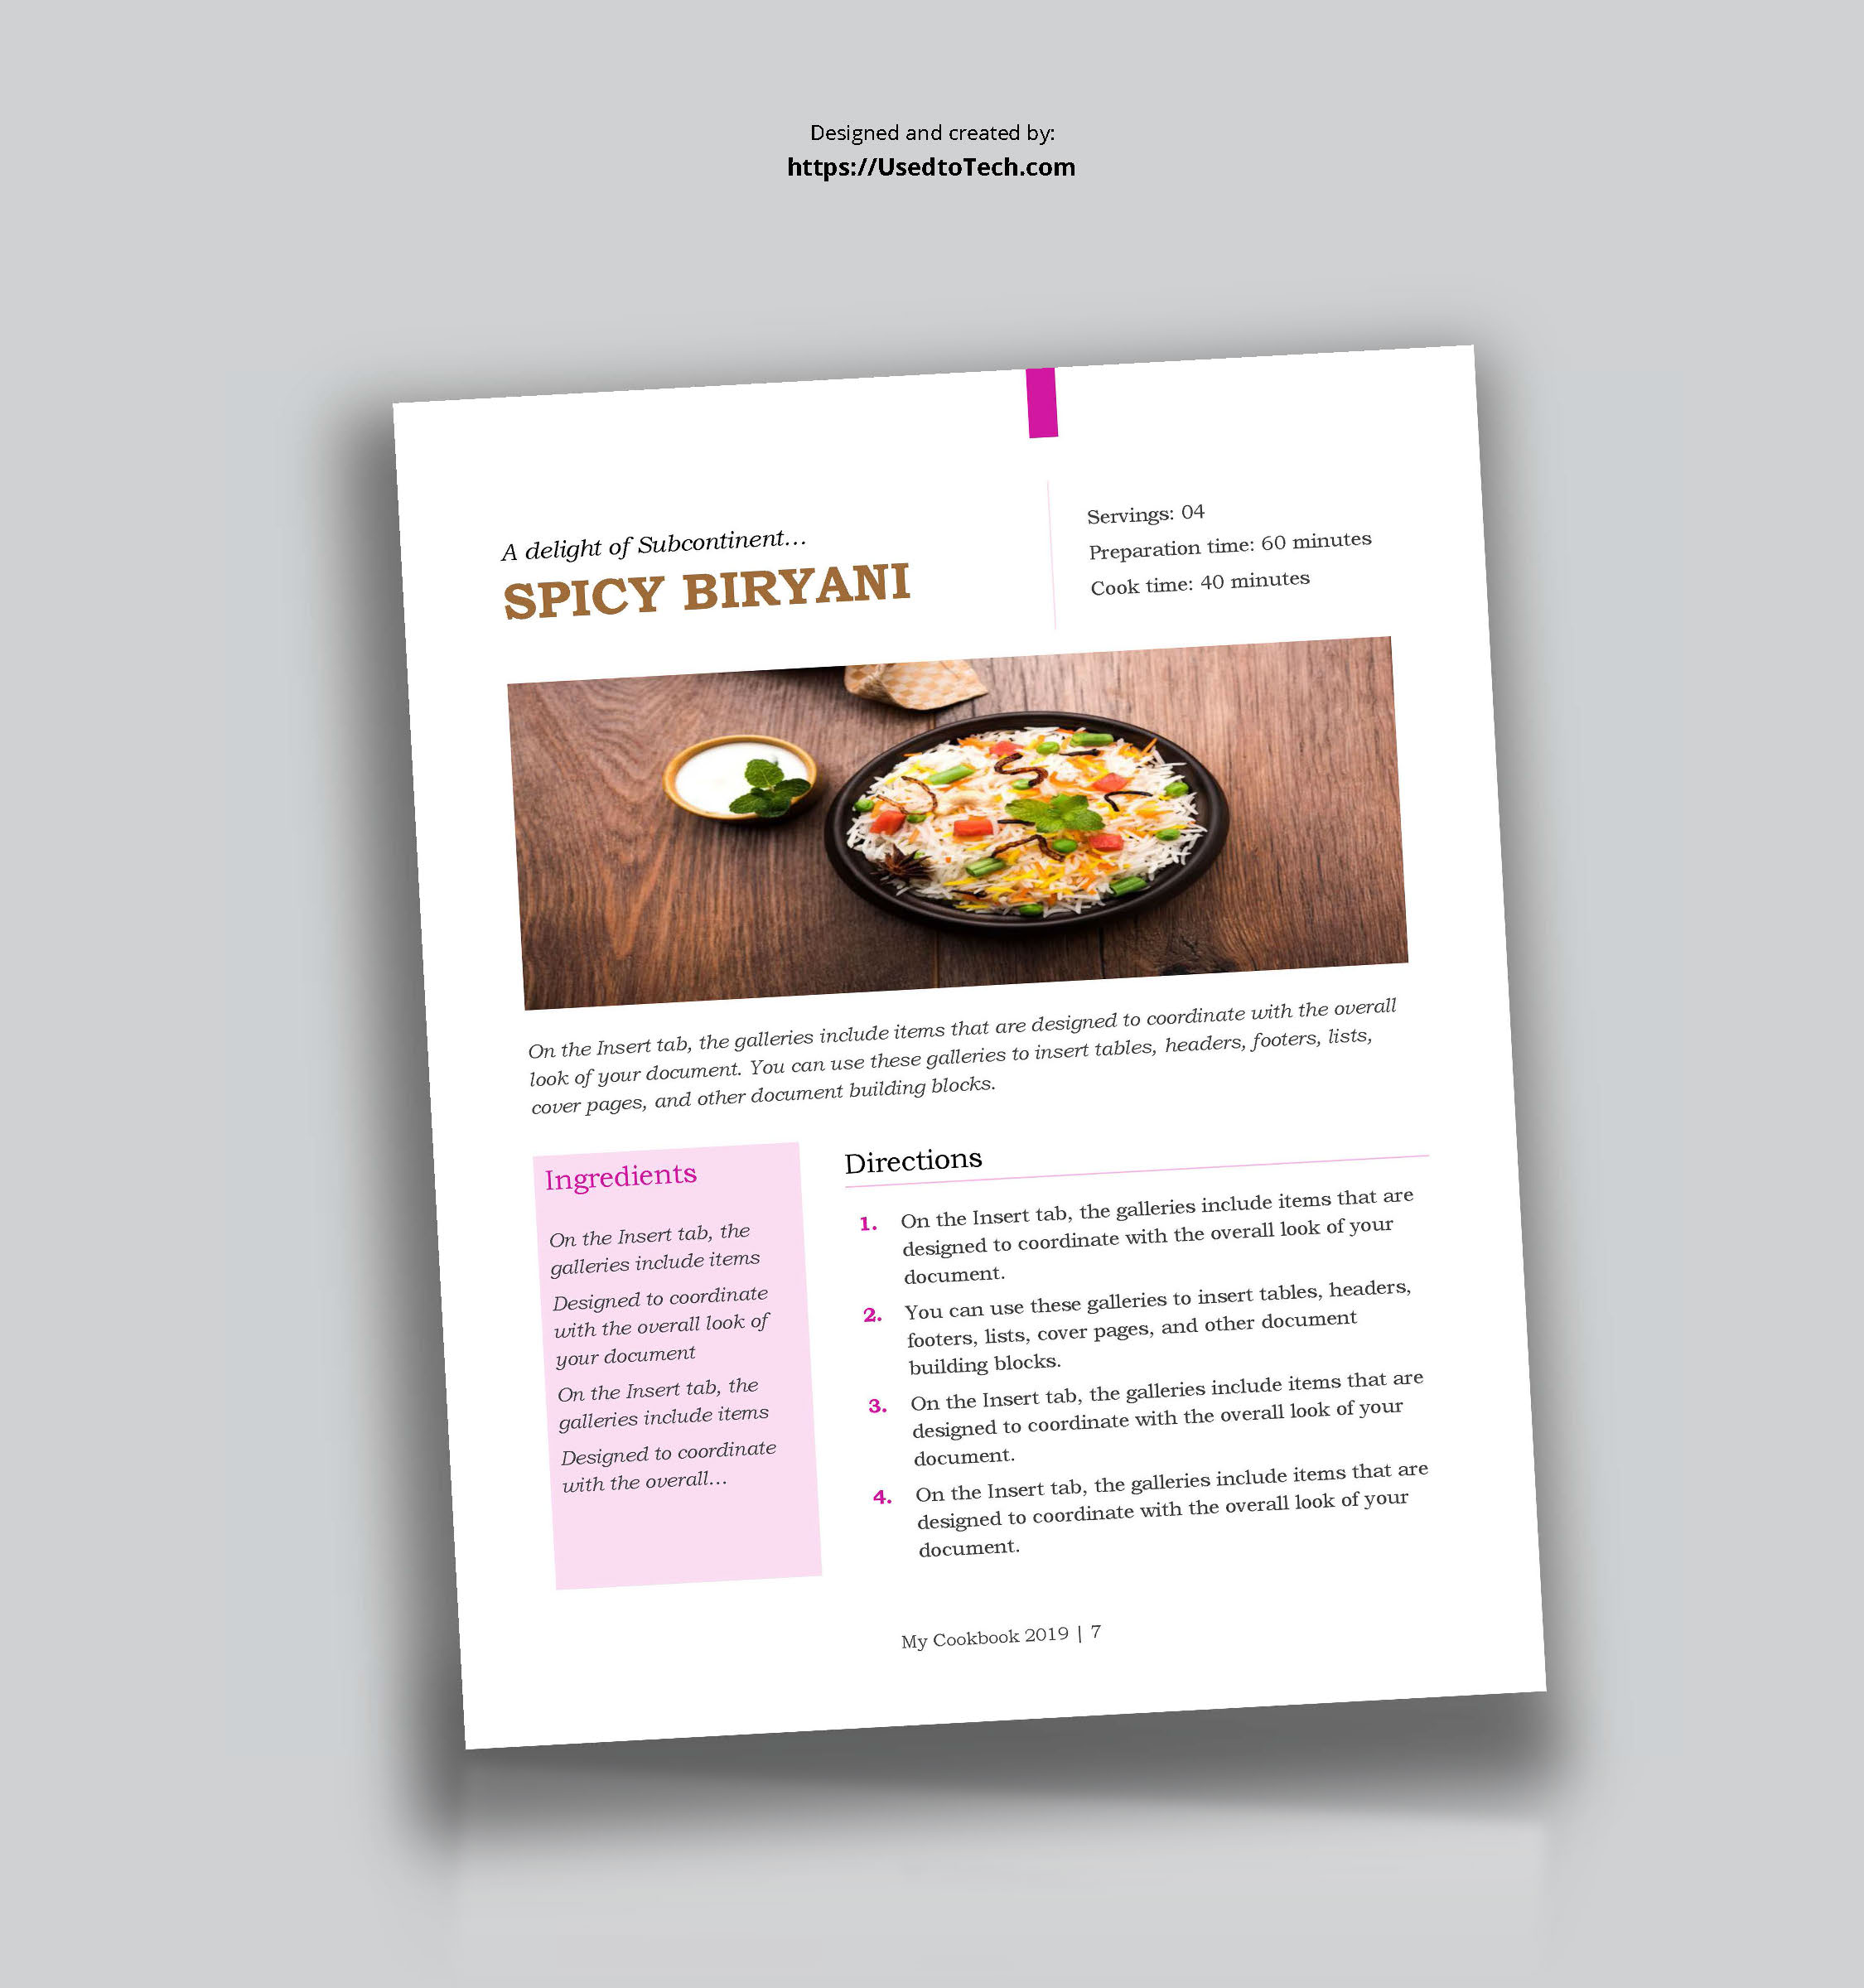 Beautiful cookbook design template in Word - Used to Tech